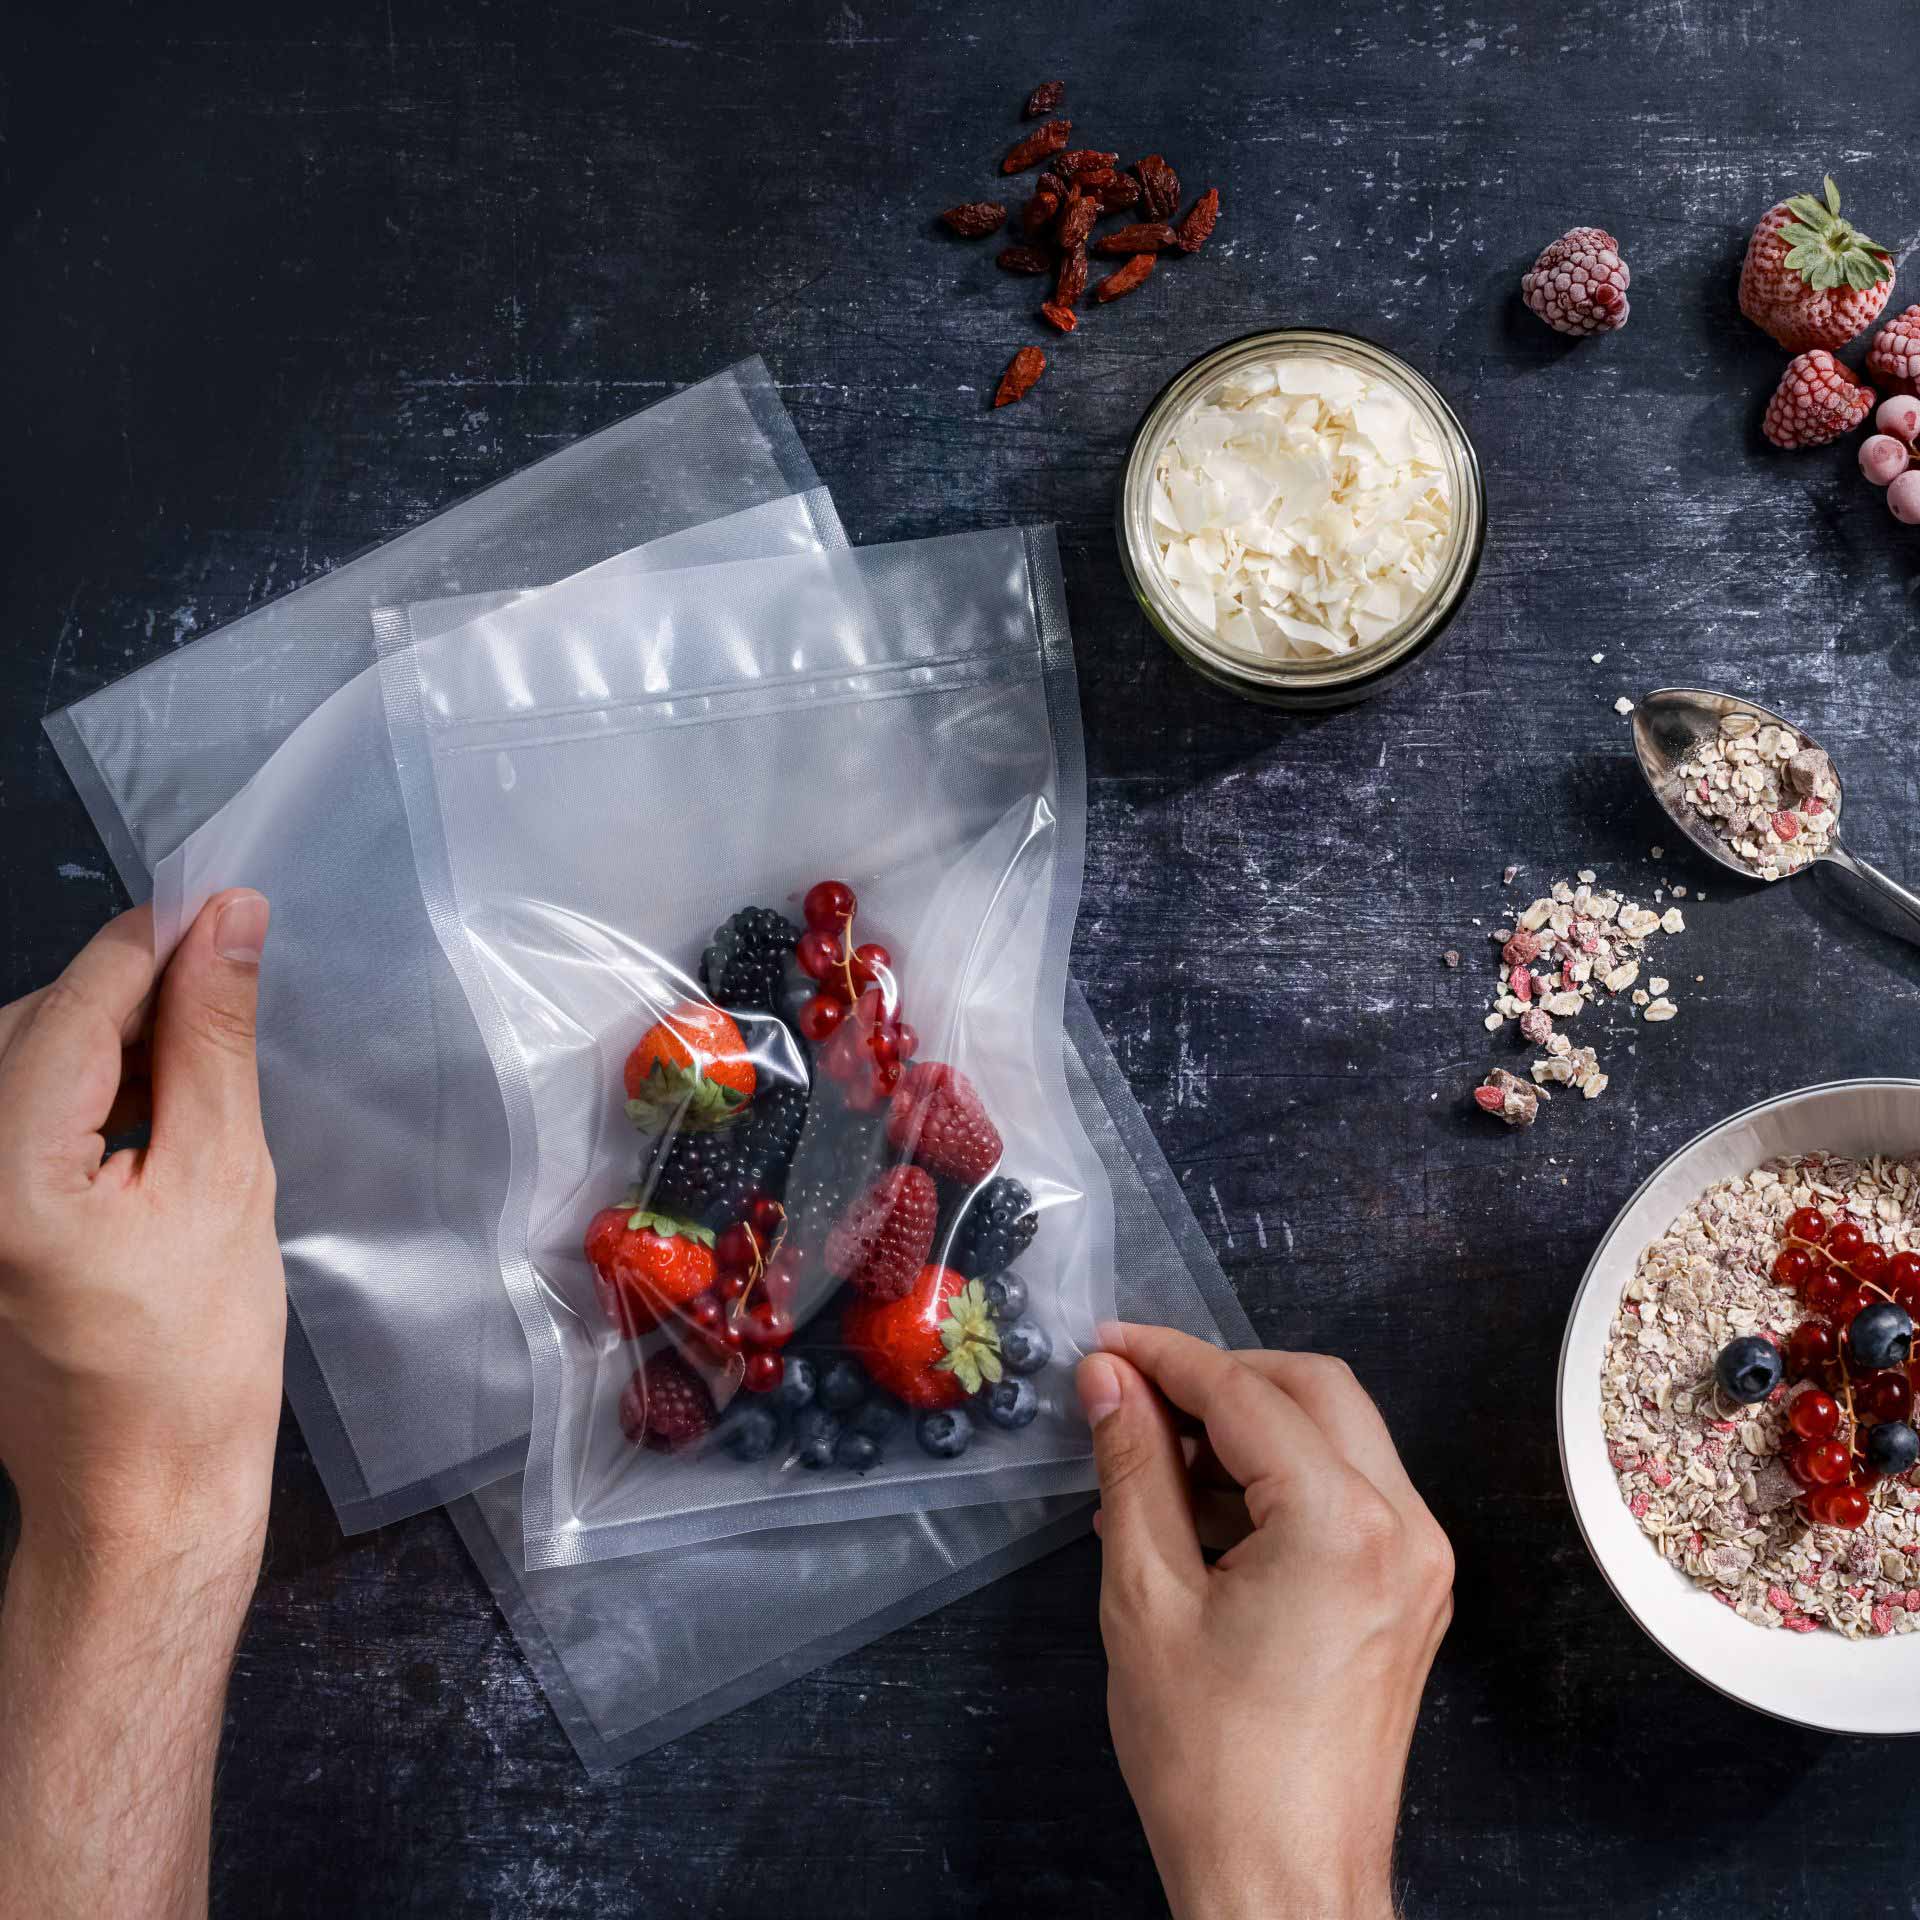 Structured vacuum bag mix-set with five different sizes, with berries vacuum-sealed in one bag